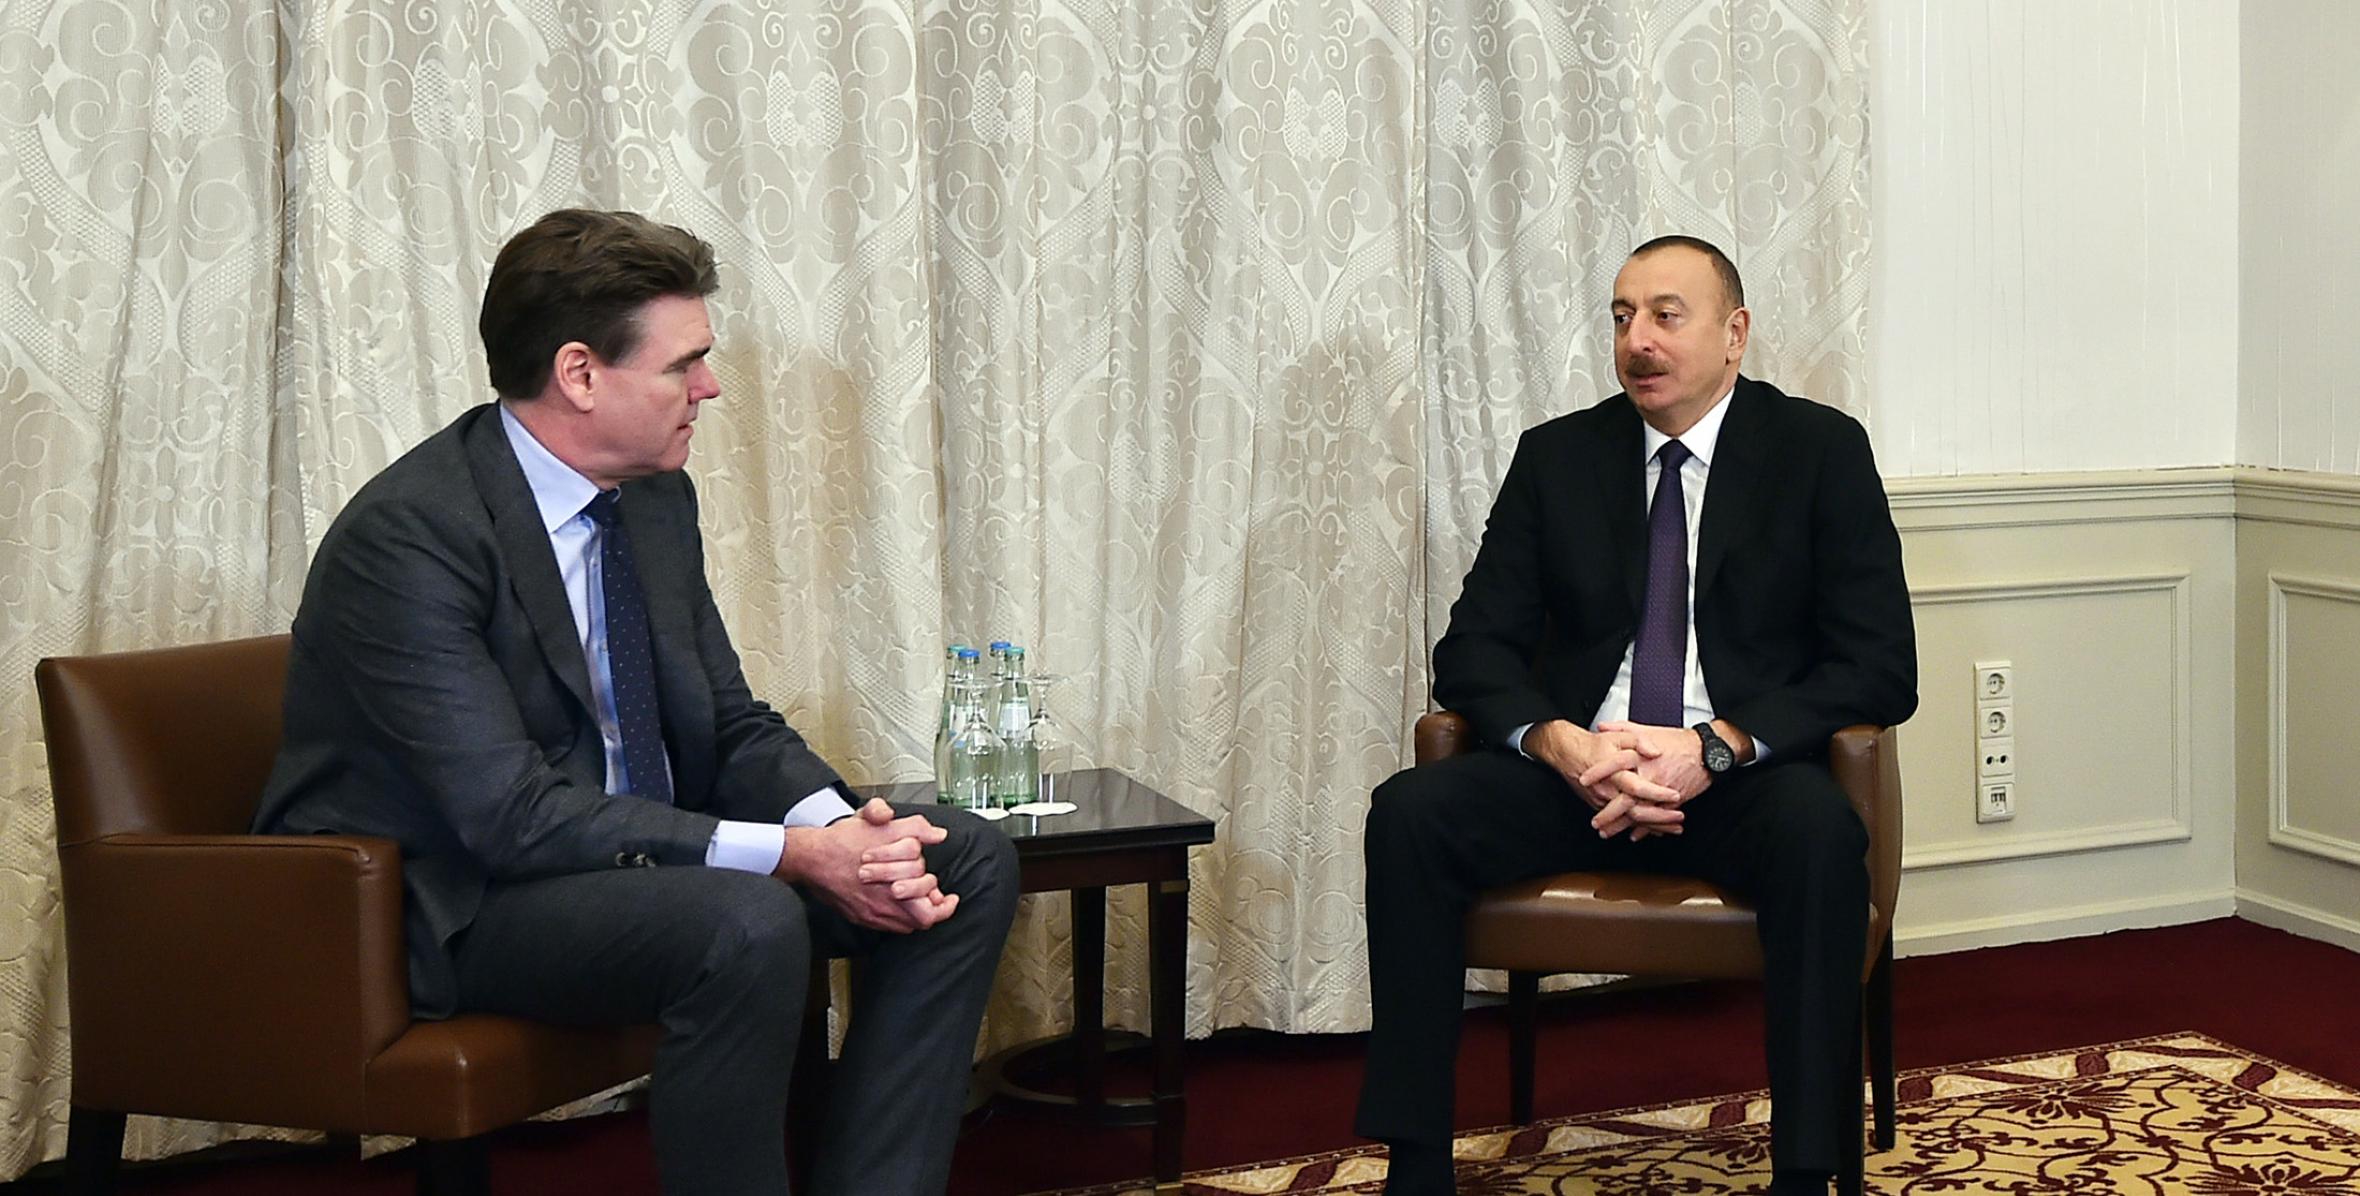 Ilham Aliyev met with Chief Executive Officer of MAN SE in Munich